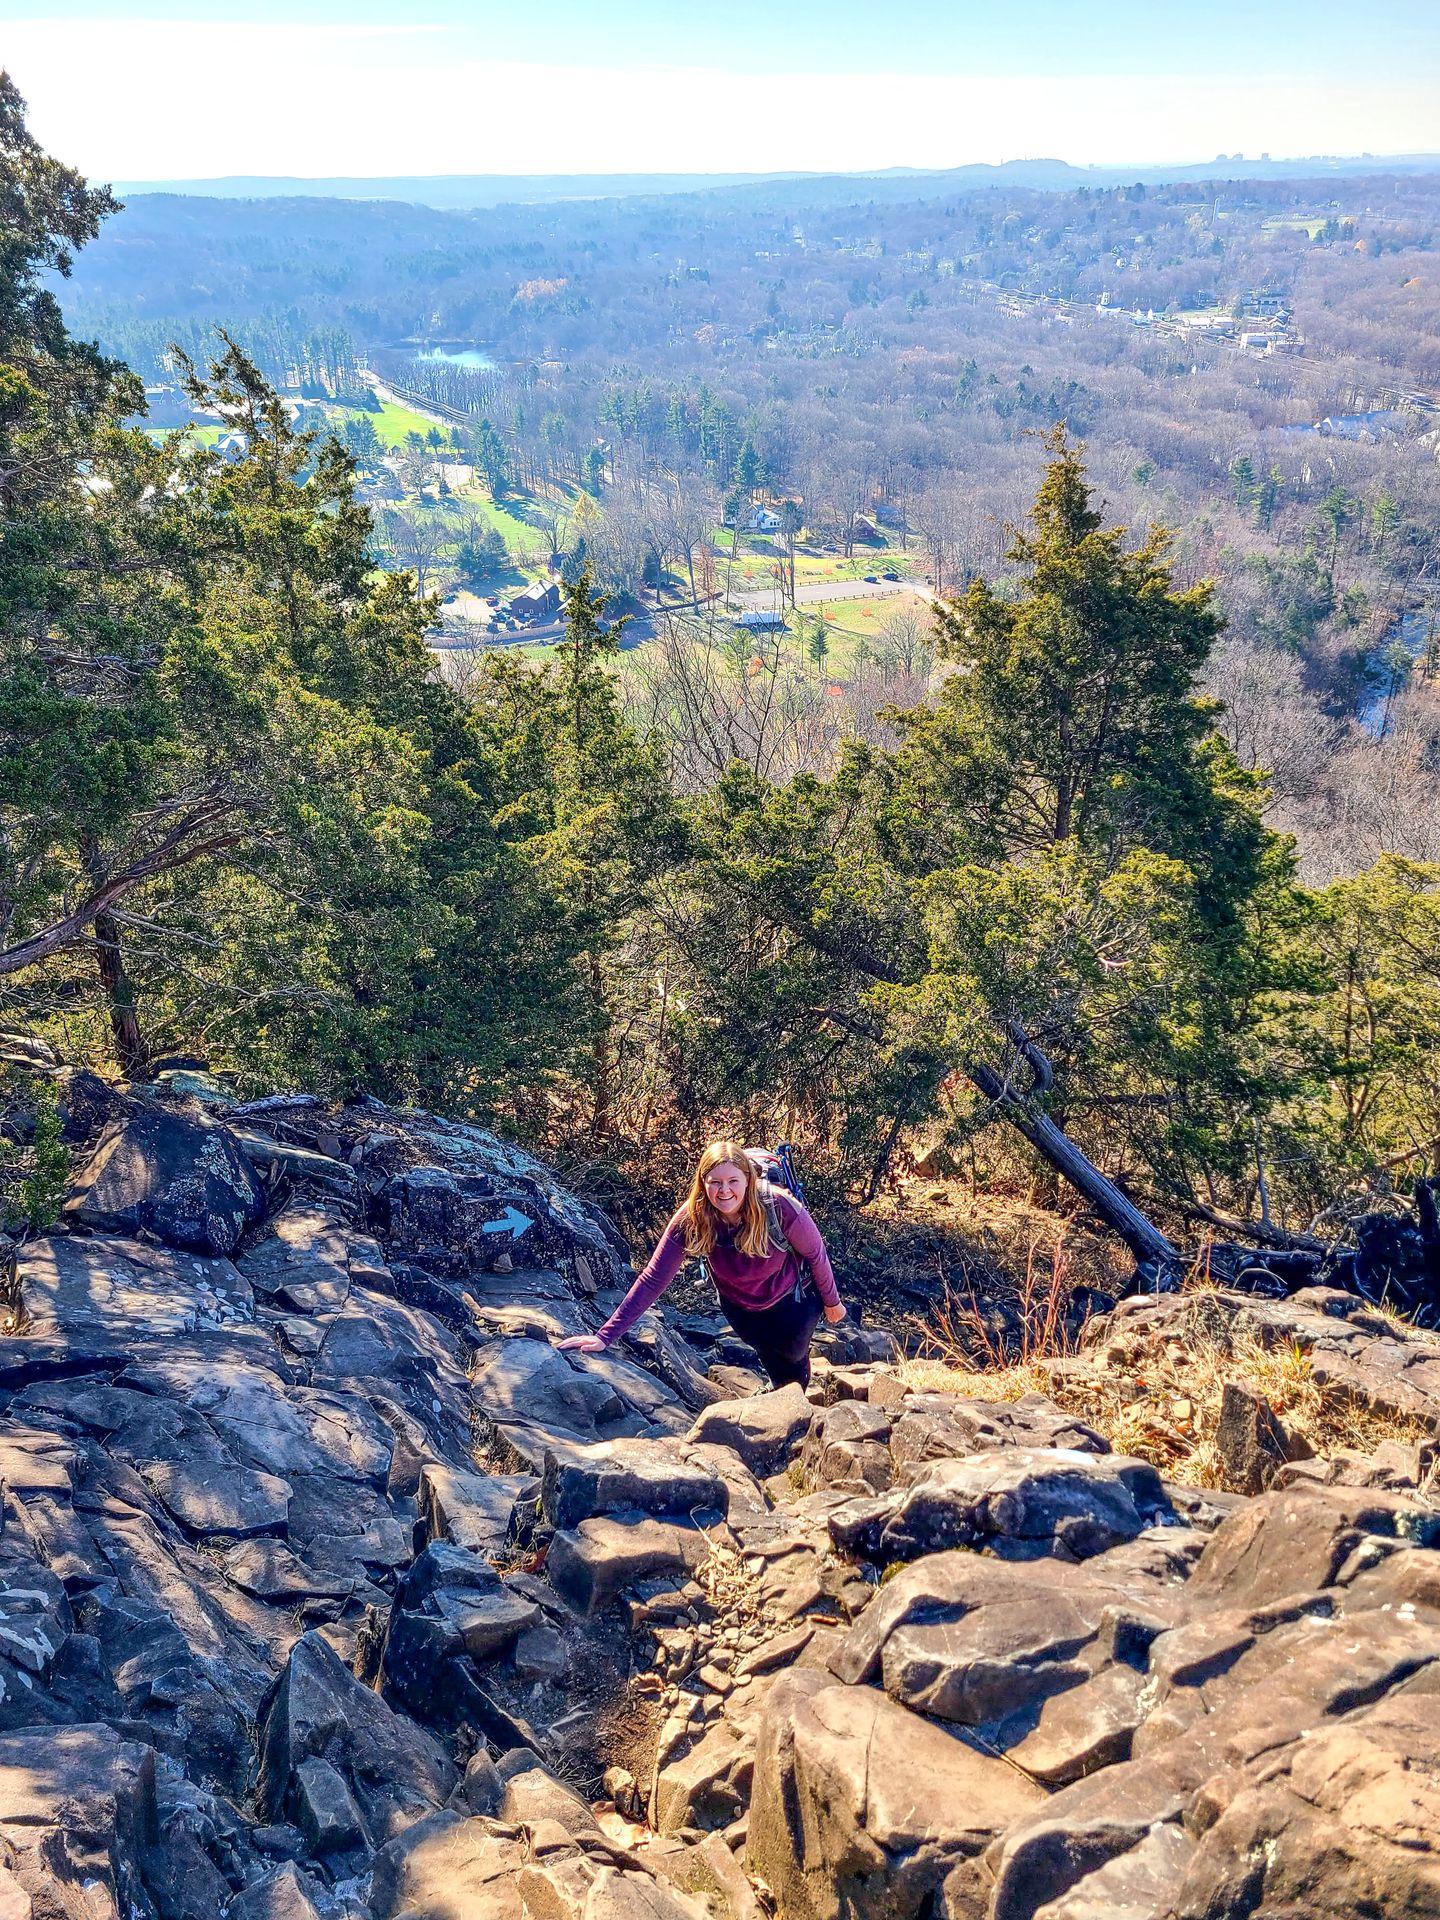 Lydia scrambling up the blue trail in Sleeping Giant State Park. There is a view of a valley down below in the background.